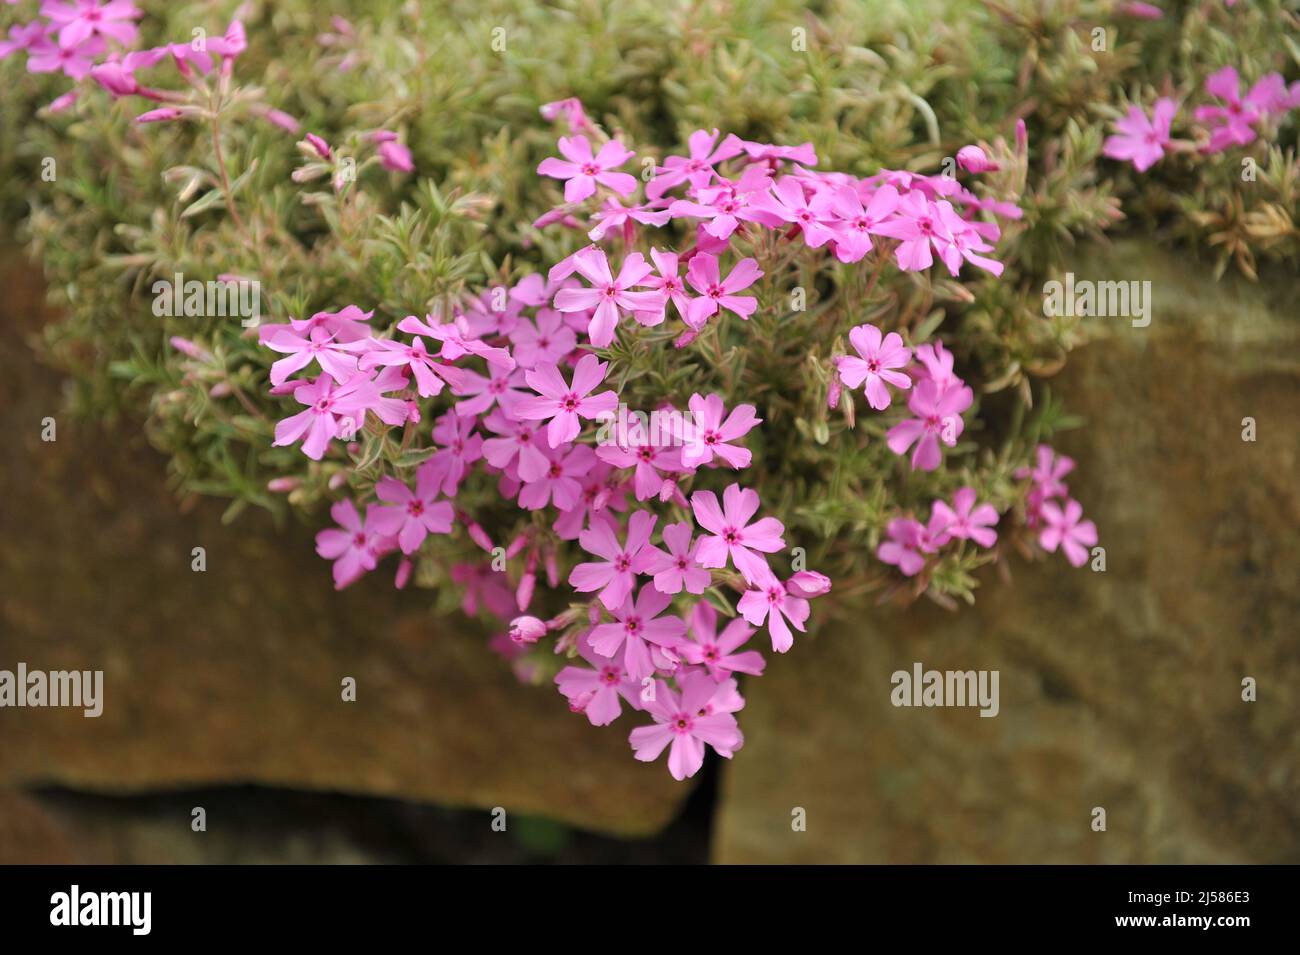 Pink moss phlox (Phlox subulata) Nettleton Variation with variegated foliage bloom in a garden in May Stock Photo